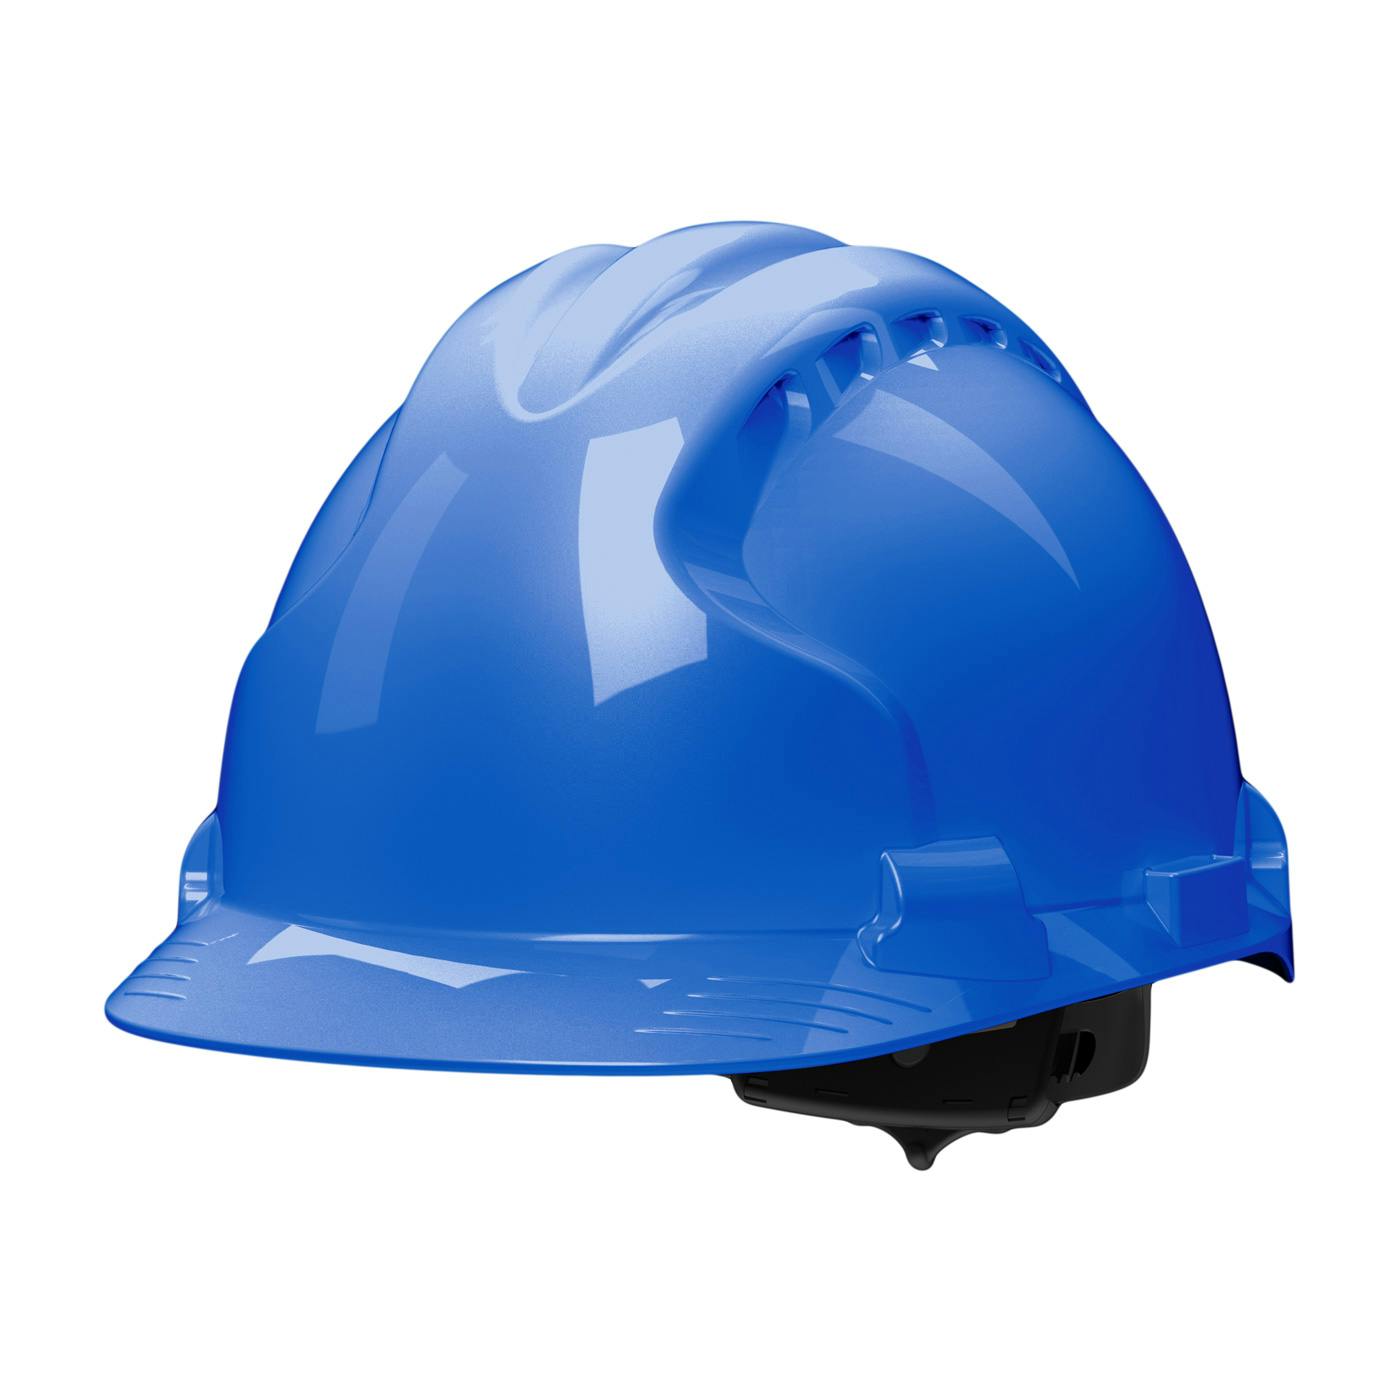 MK8 Evolution® Type II Hard Hat with HDPE Shell, EPS Impact Liner, Polyester Suspension and Wheel Ratchet Adjustment (280-AHS150)_0